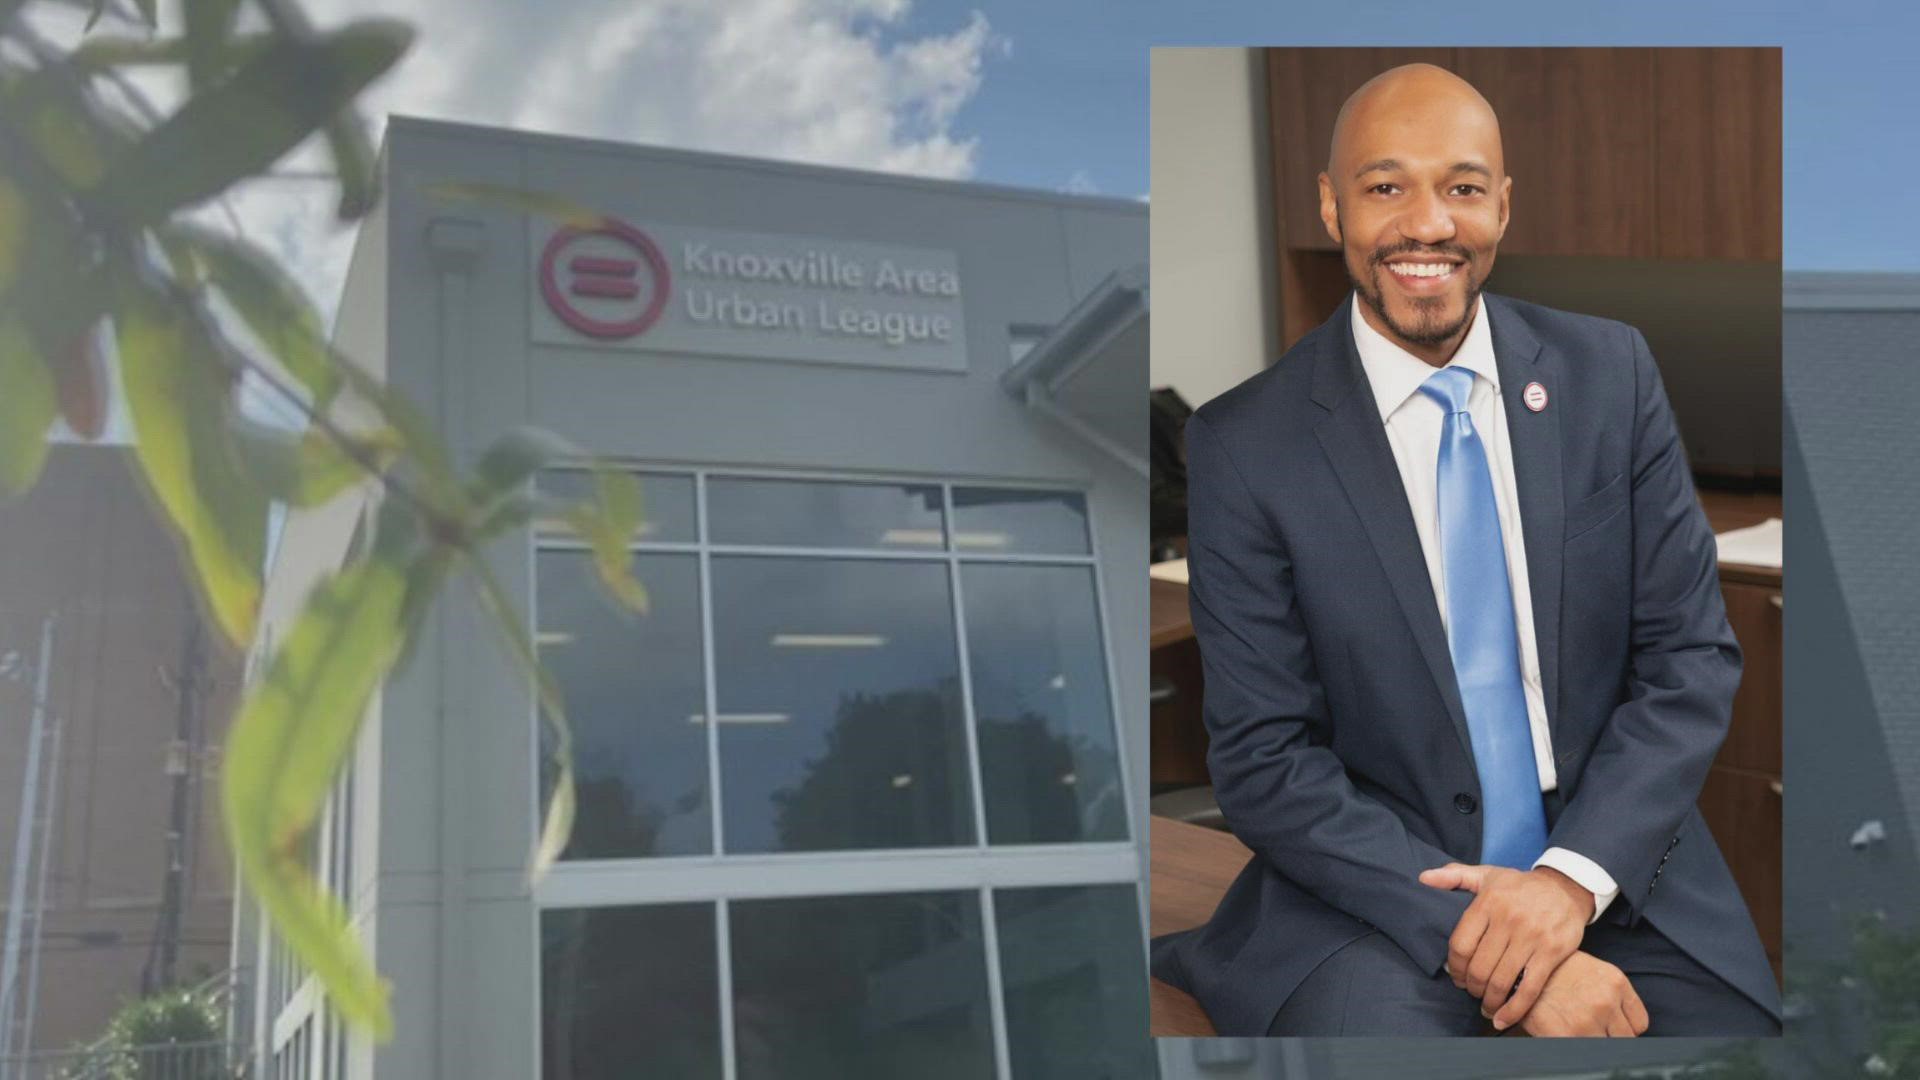 Charles F. Lomax Jr. emerged from a pool of candidates considered during a national search conducted in cooperation with the National Urban League.